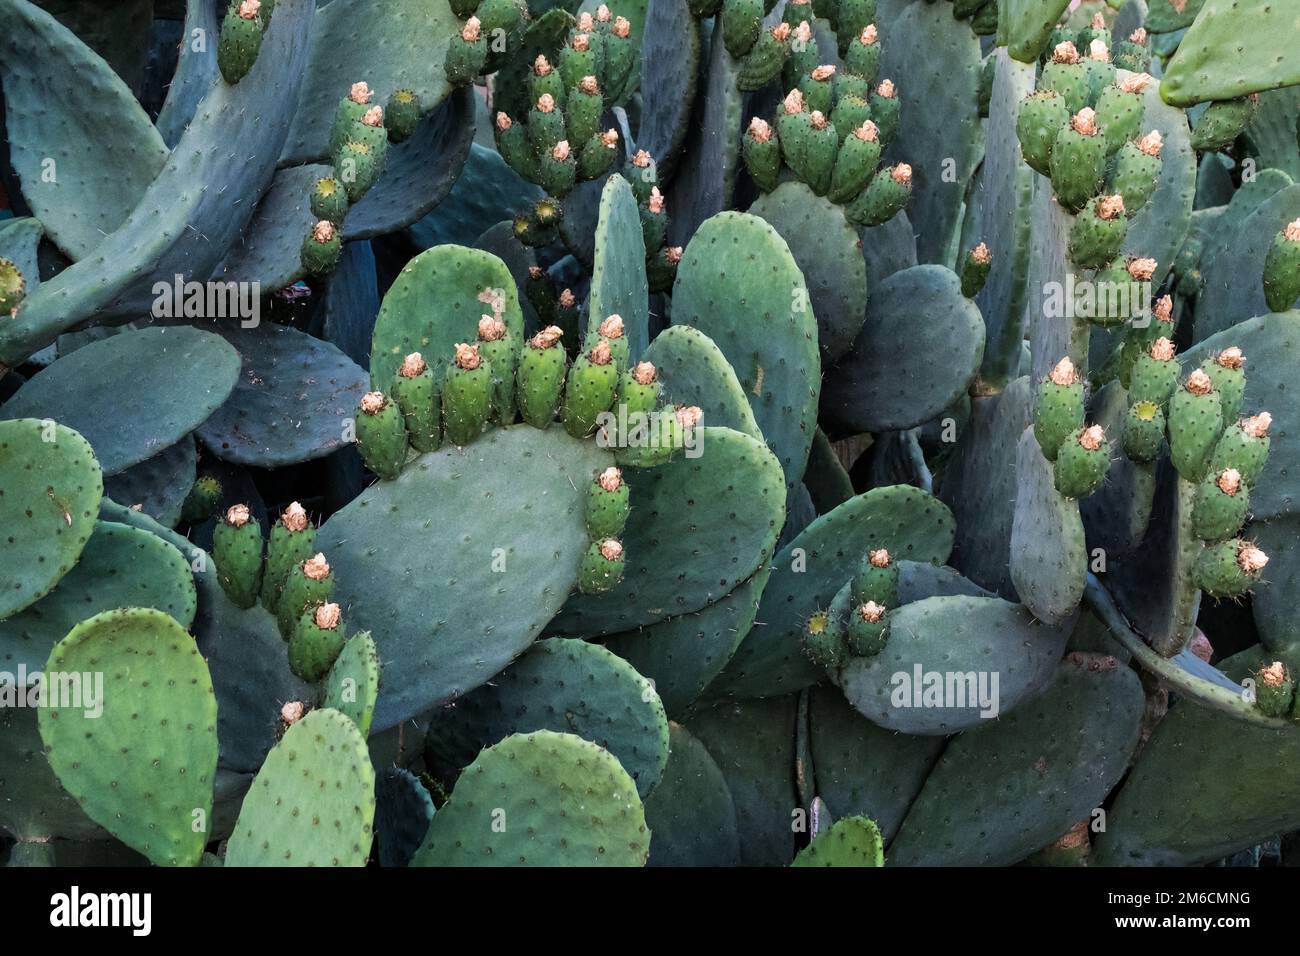 Green pads on a prickly pear cactus with fruits. Stock Photo